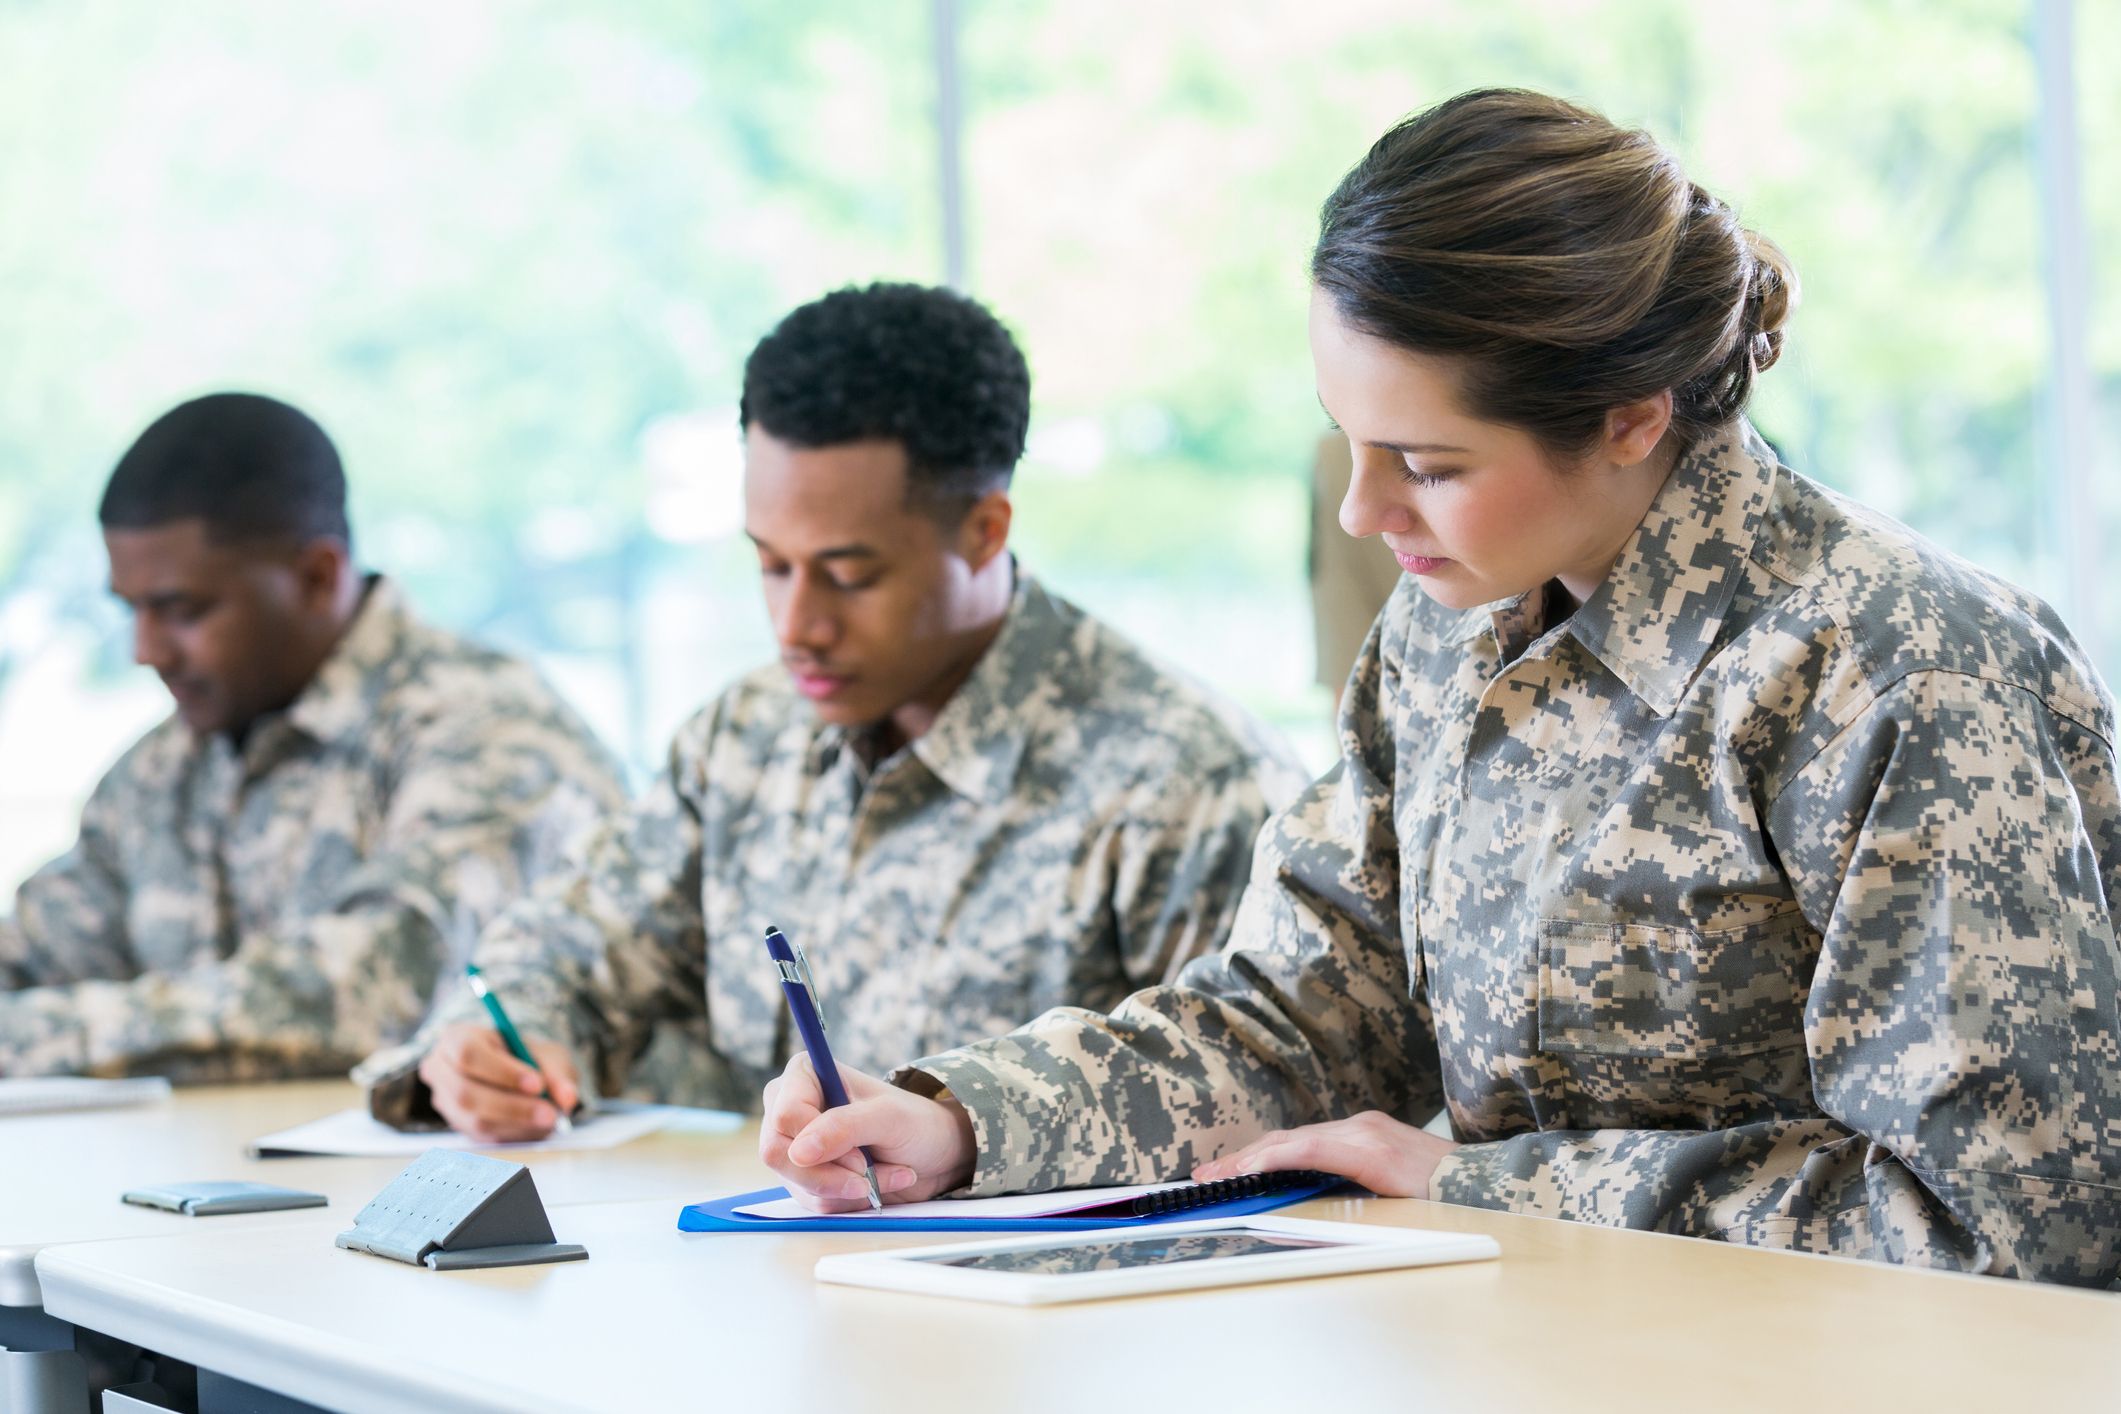 two men and a woman in army modern military fatigues taking a test in a room with big windows, daytime